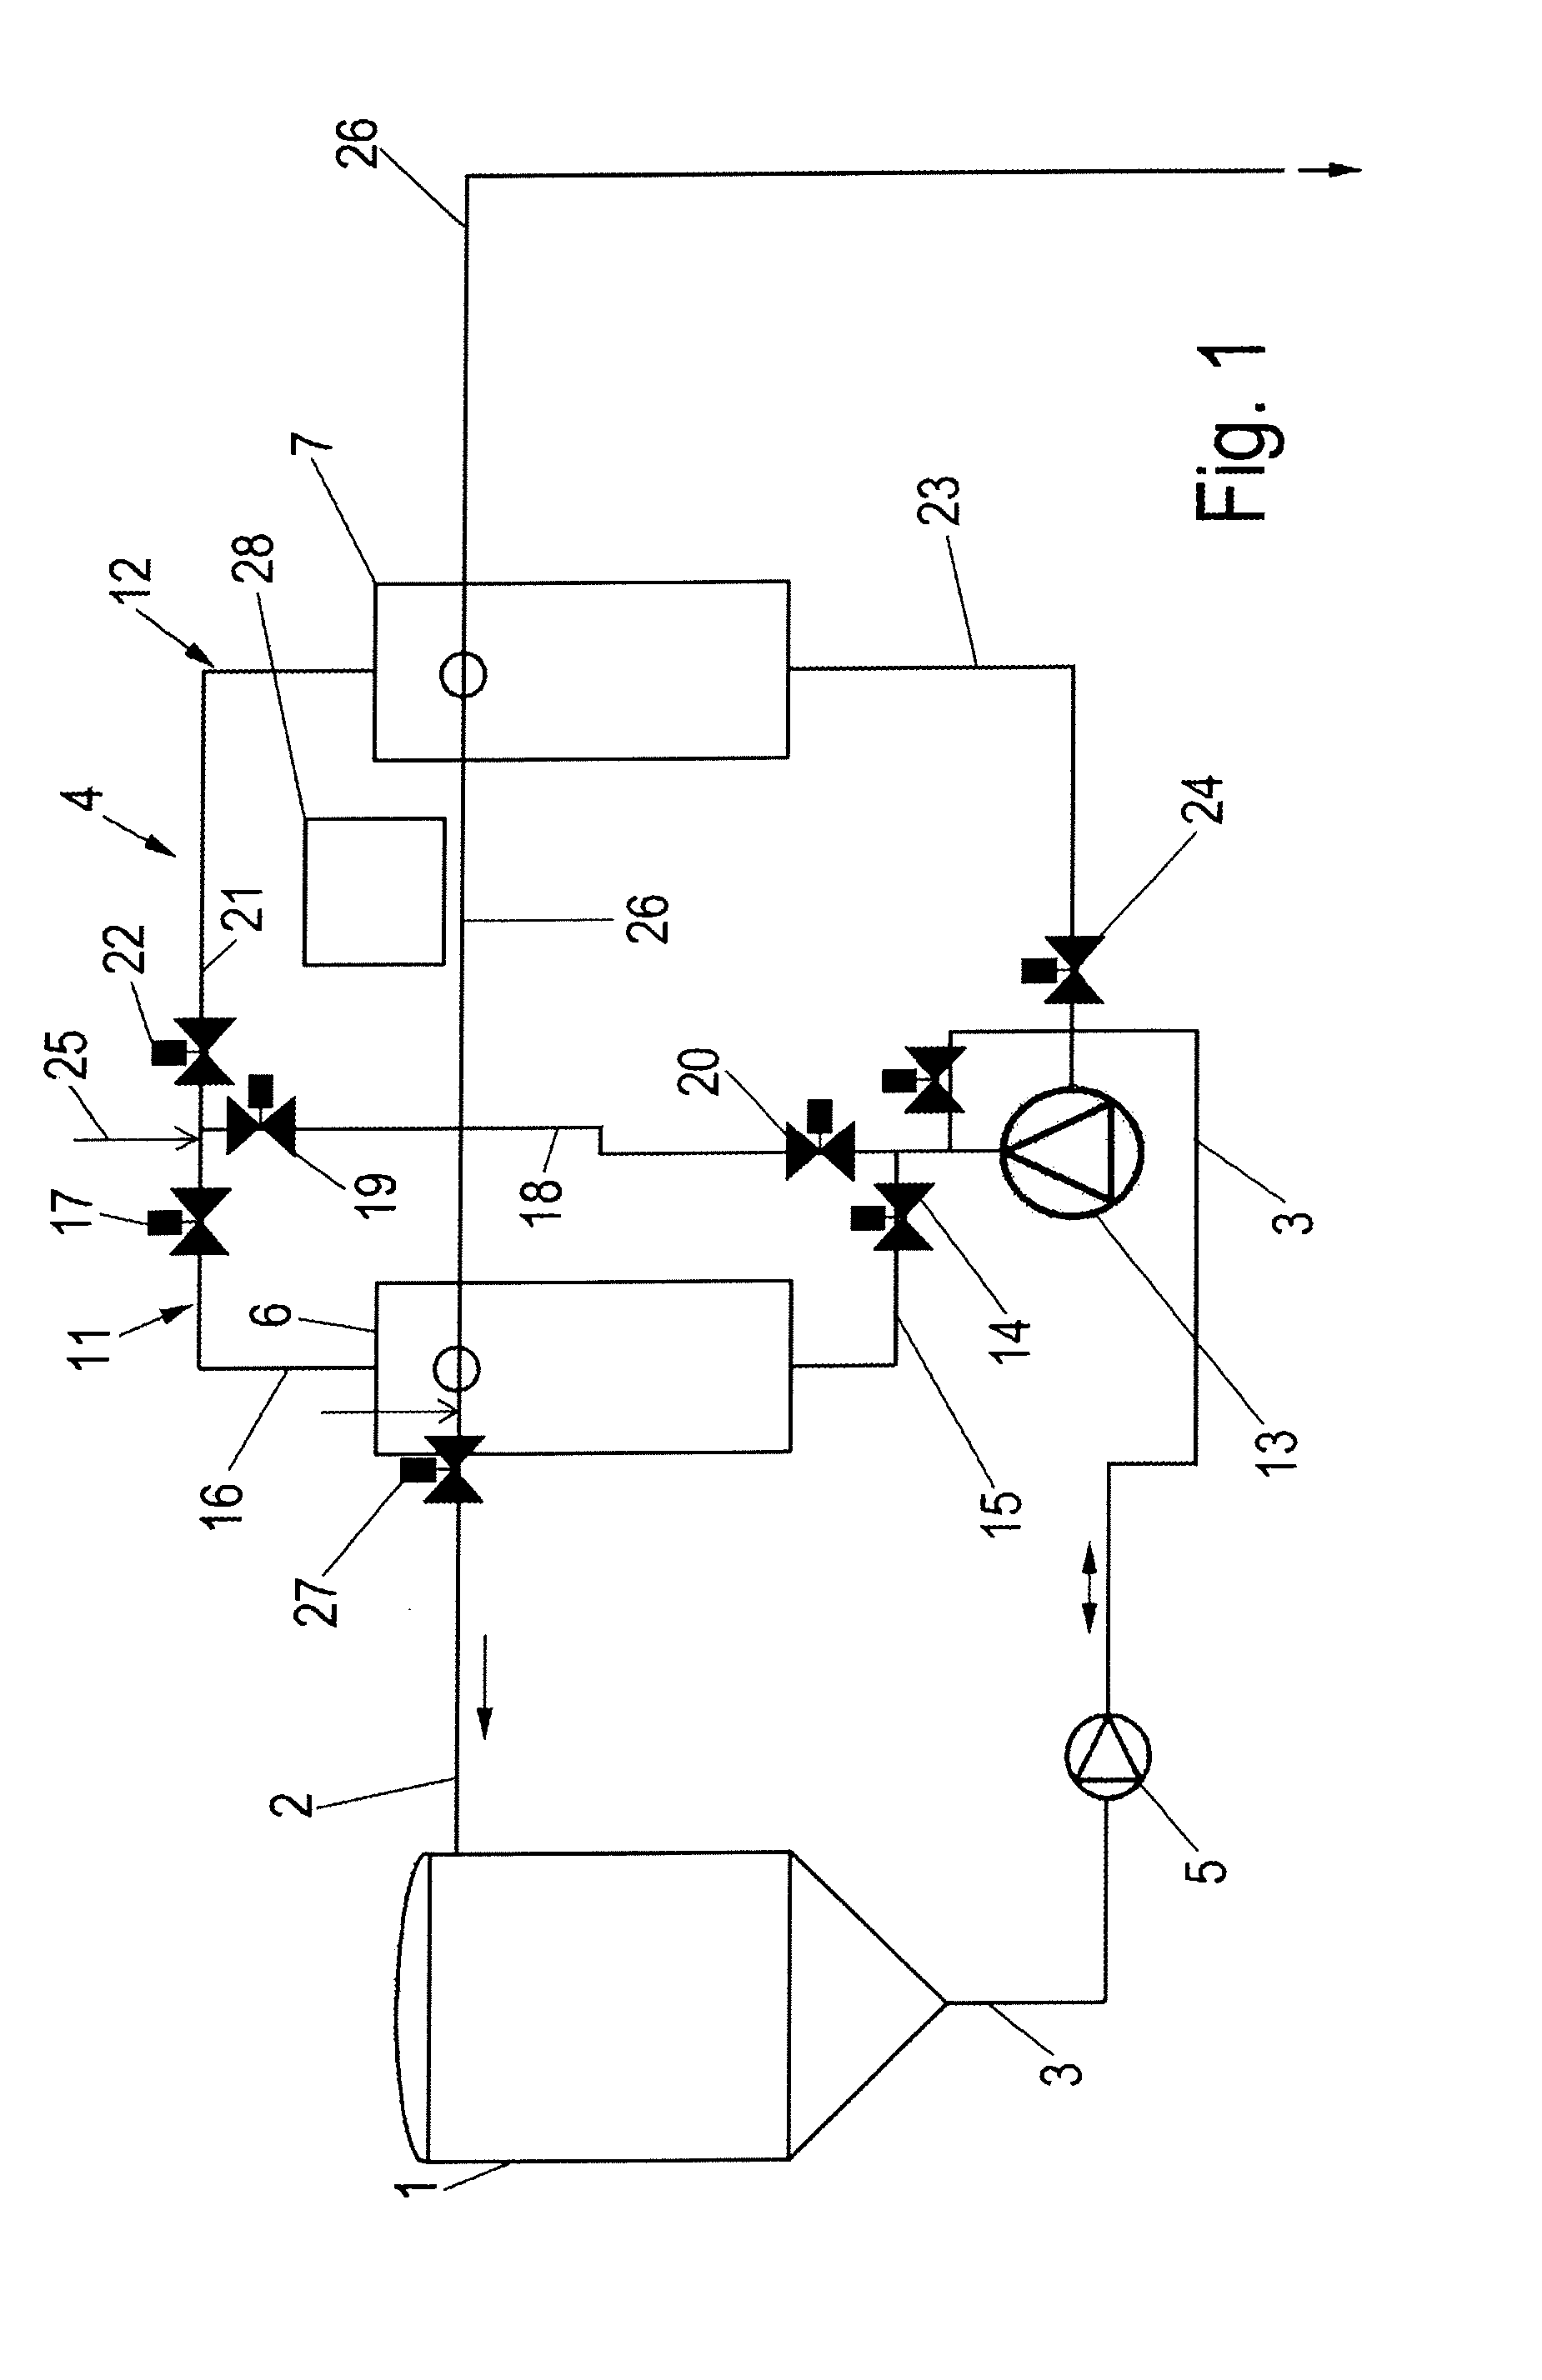 System and method for filtering beverages